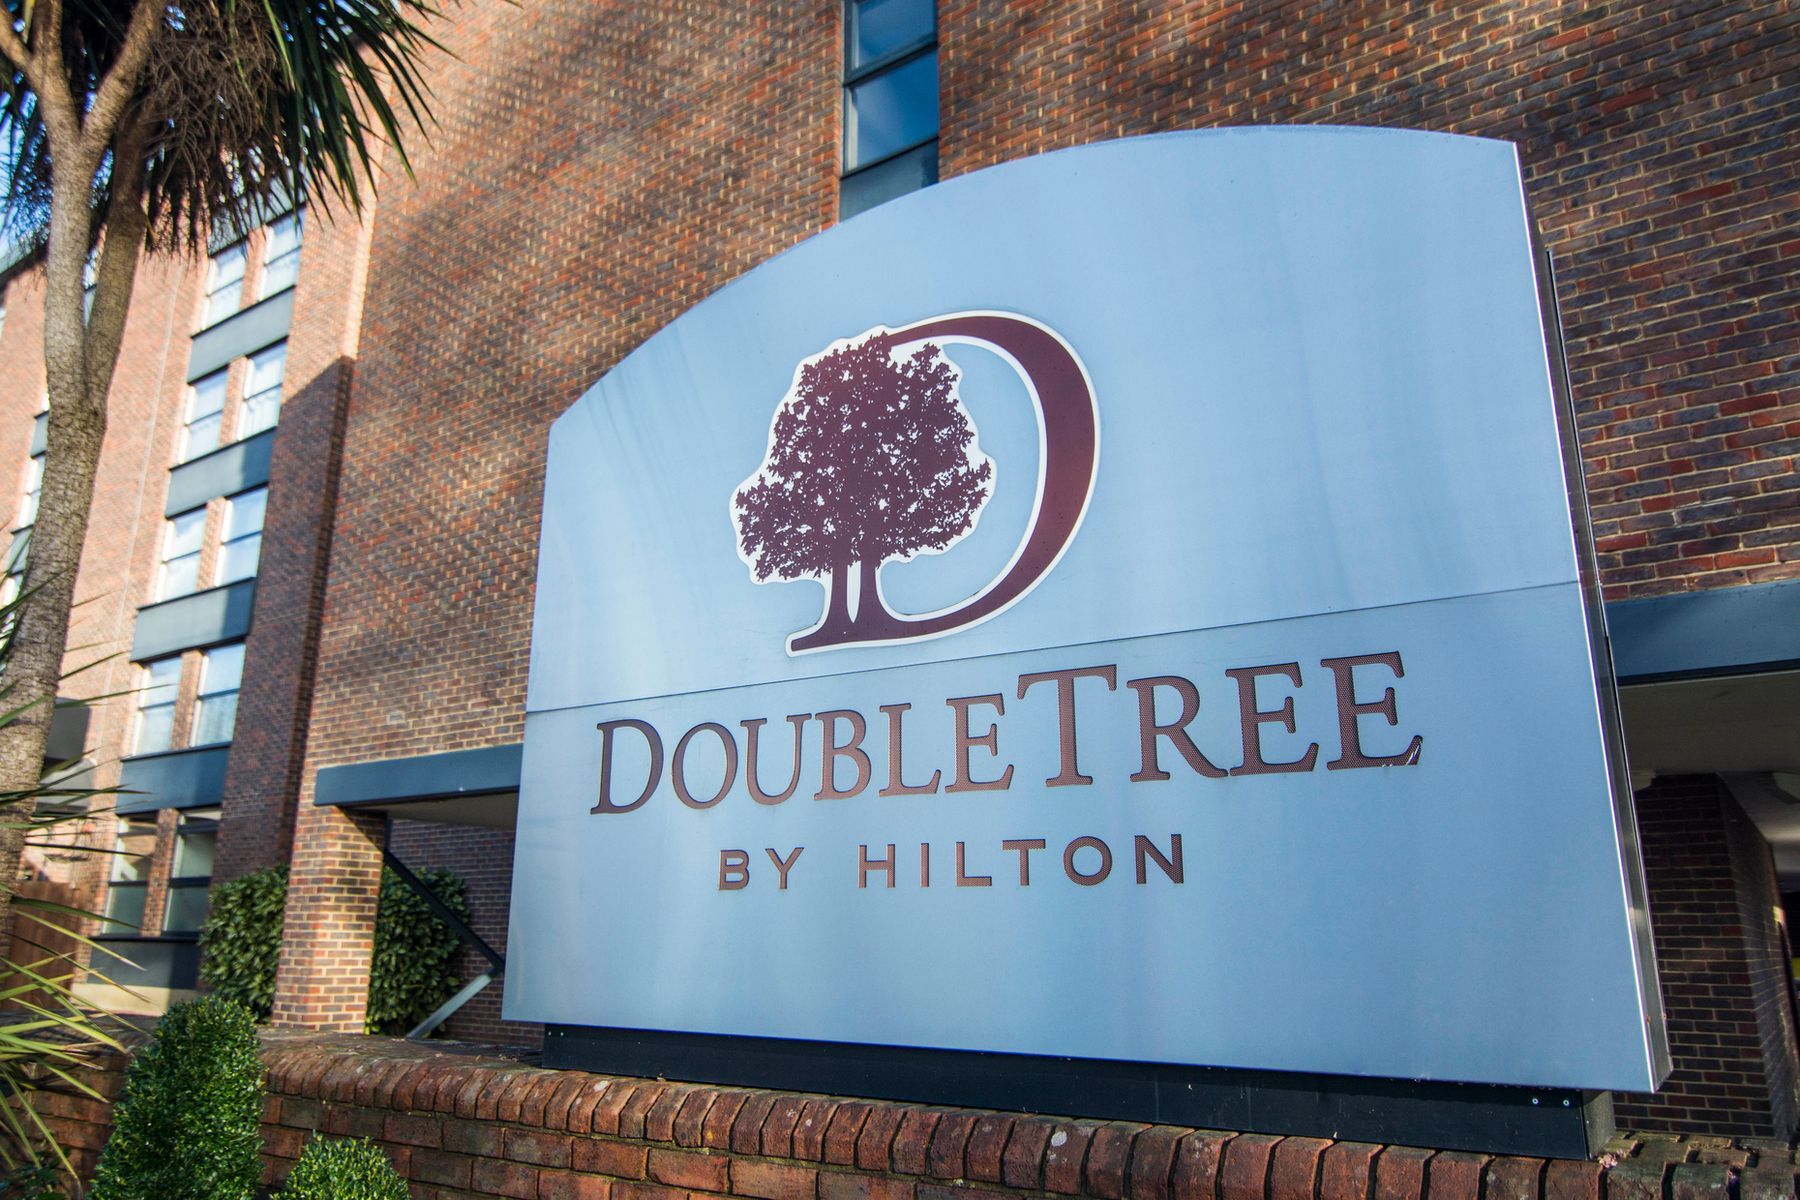 <p>The DoubleTree name is so iconic that it was even the basis of <a href="https://www.quotes.net/quote/58605" rel="noreferrer noopener">a joke</a> by the late great comedian Mitch Hedberg. The first DoubleTree location was founded in Scottsdale, Arizona in 1969, and since then the brand has expanded to <a href="https://www.scrapehero.com/location-reports/DoubleTree-USA/" rel="noreferrer noopener"> 400 locations</a> across the United States. In 1999 the brand was bought by Hilton and now operates under the DoubleTree by Hilton name as a mid-range option.</p>